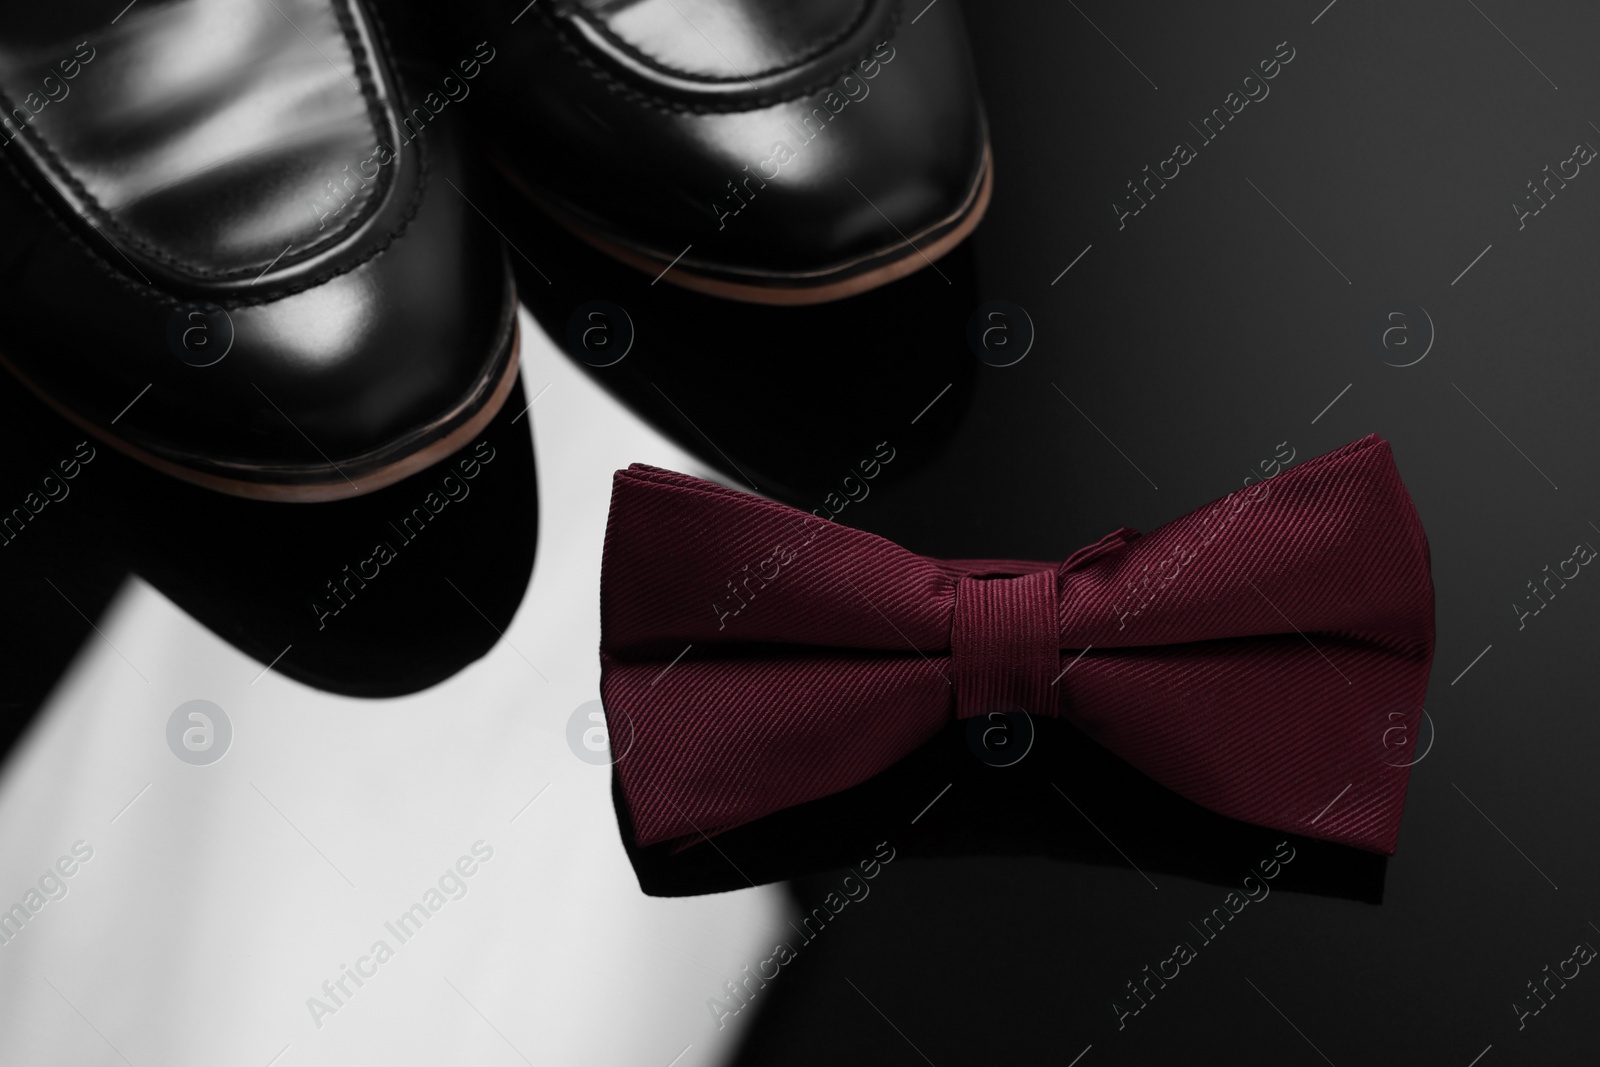 Photo of Stylish burgundy bow tie and shoes on black mirror surface